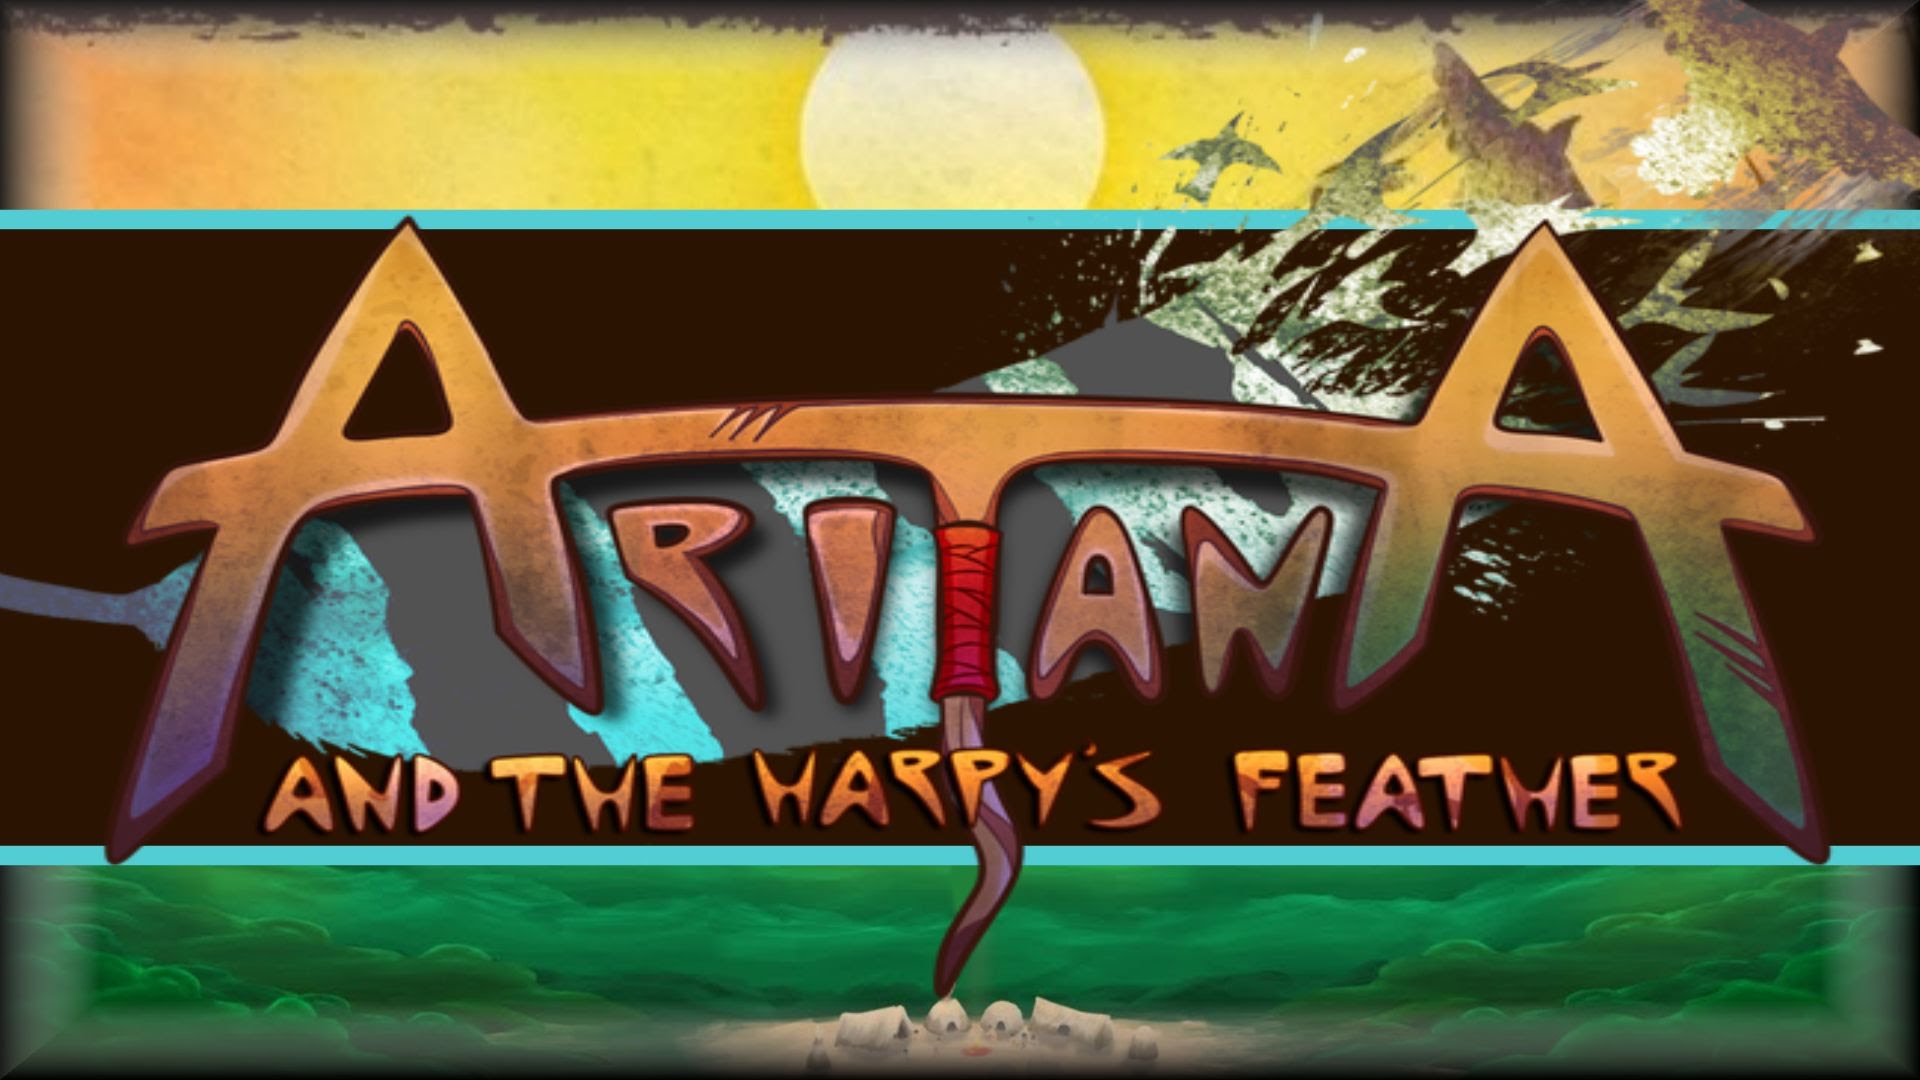 Aritana And The Harpy's Feather #16